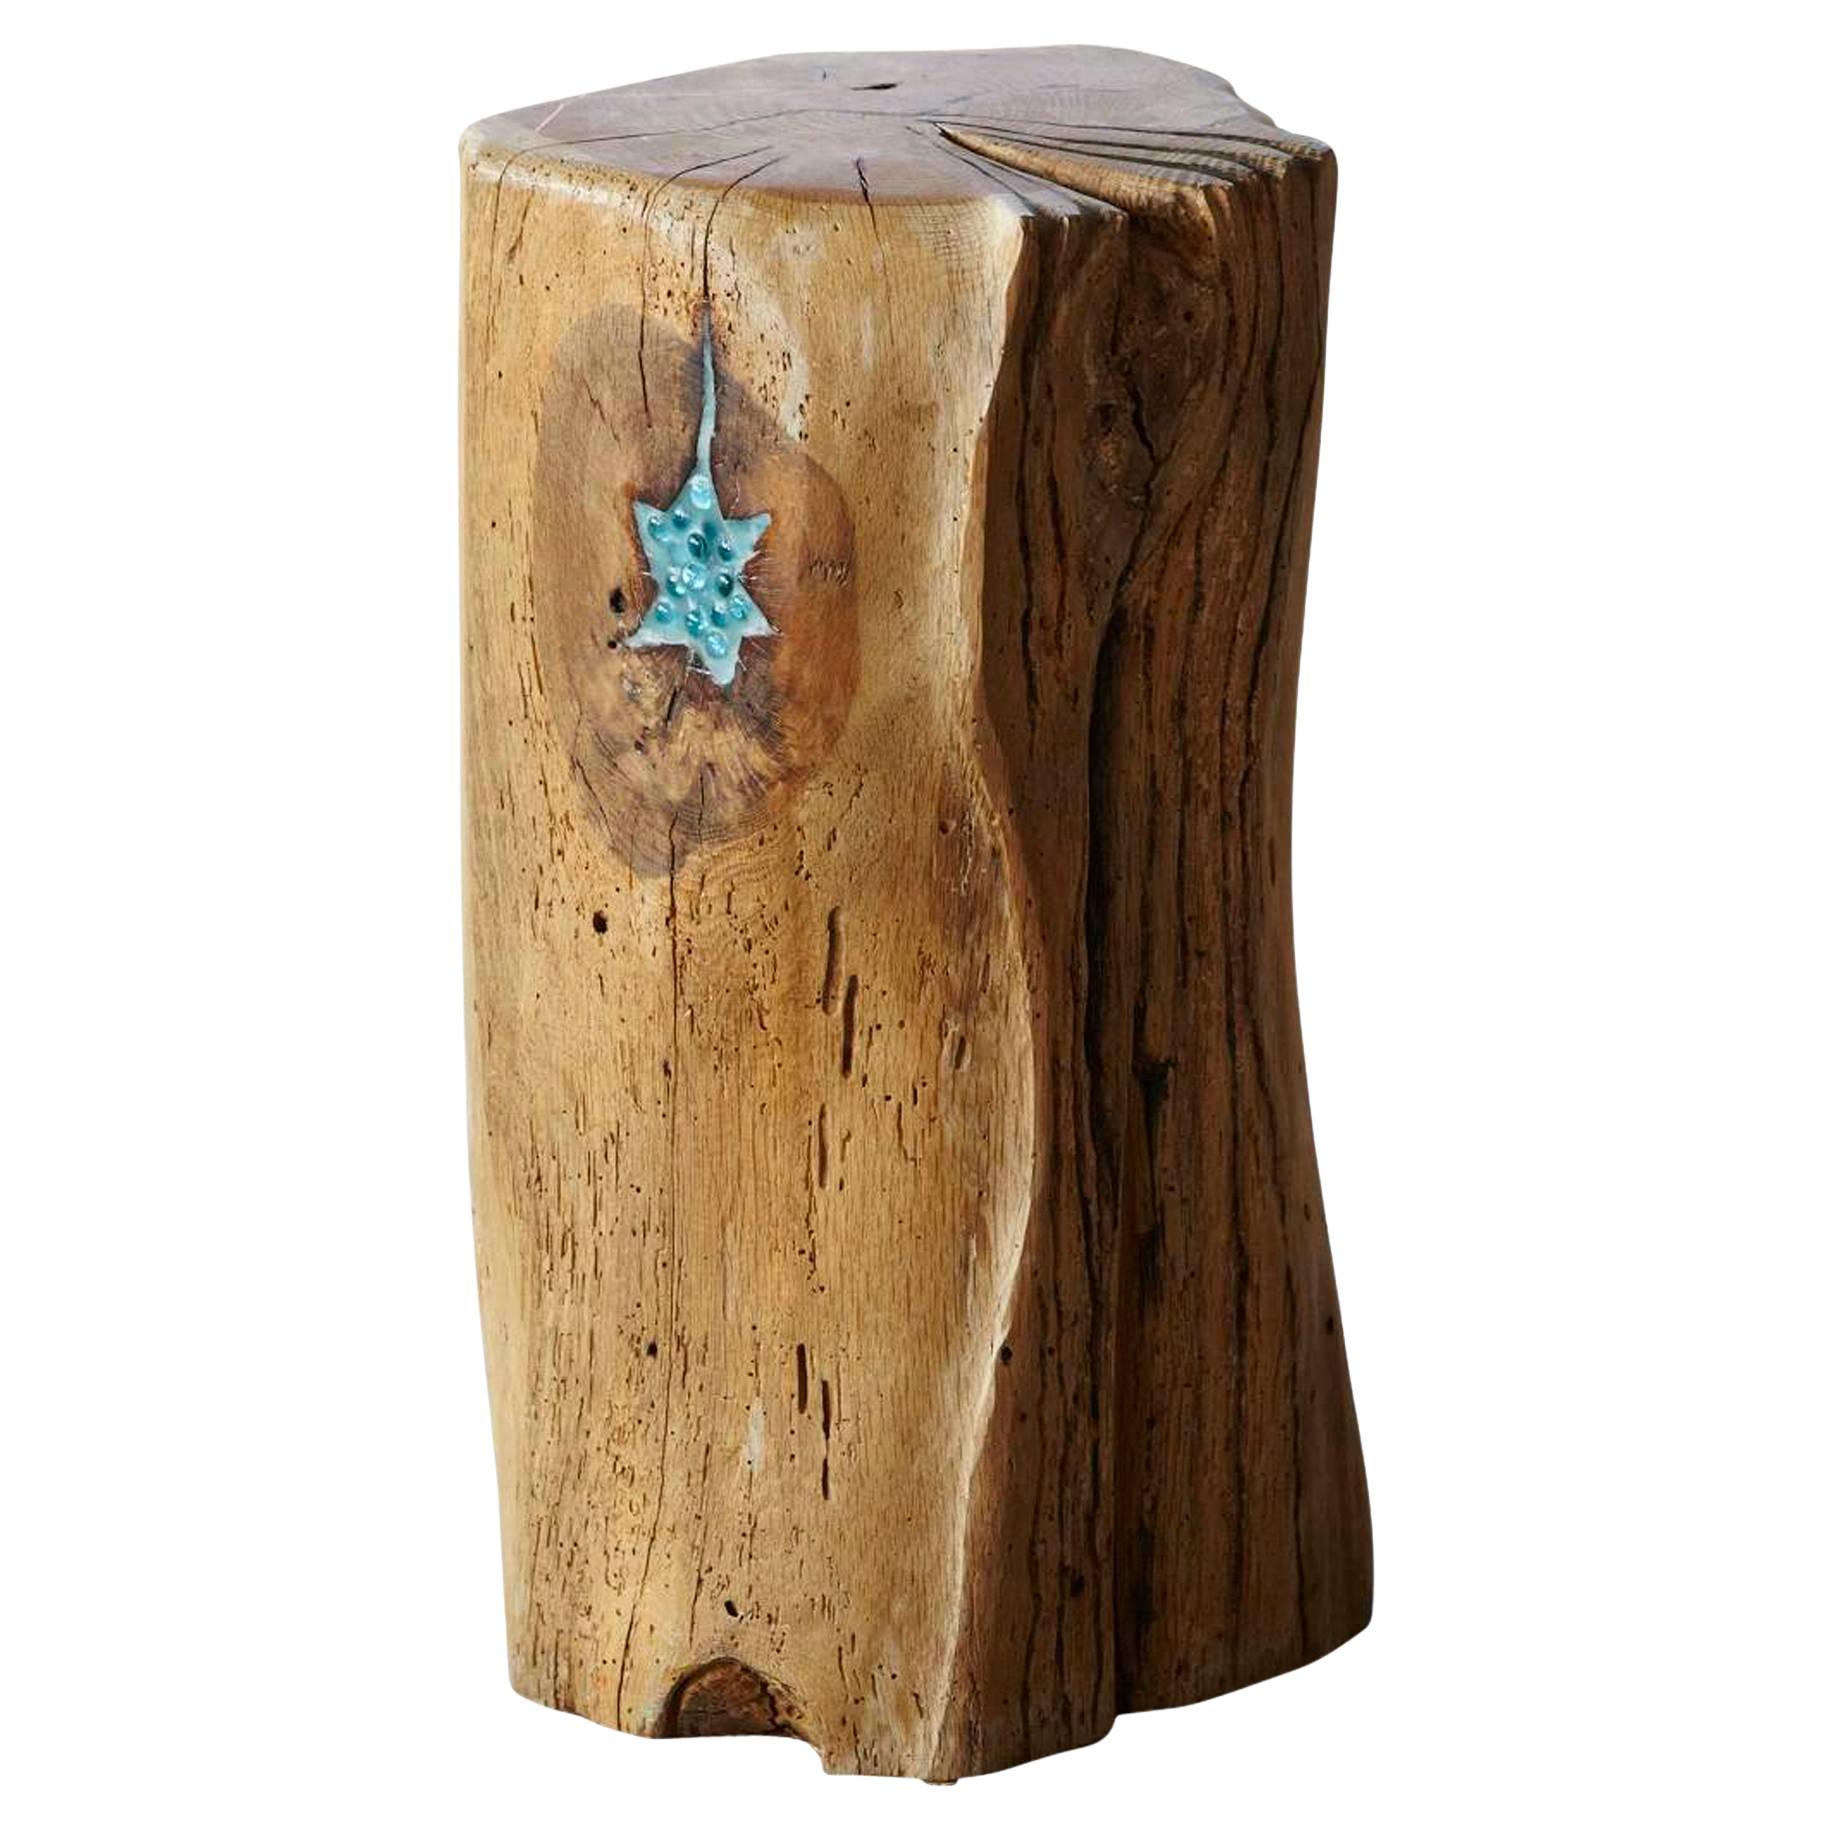 Stern, Stool by Hanni Dietrich, Carved Oak Stool with Resin, Inlay For Sale